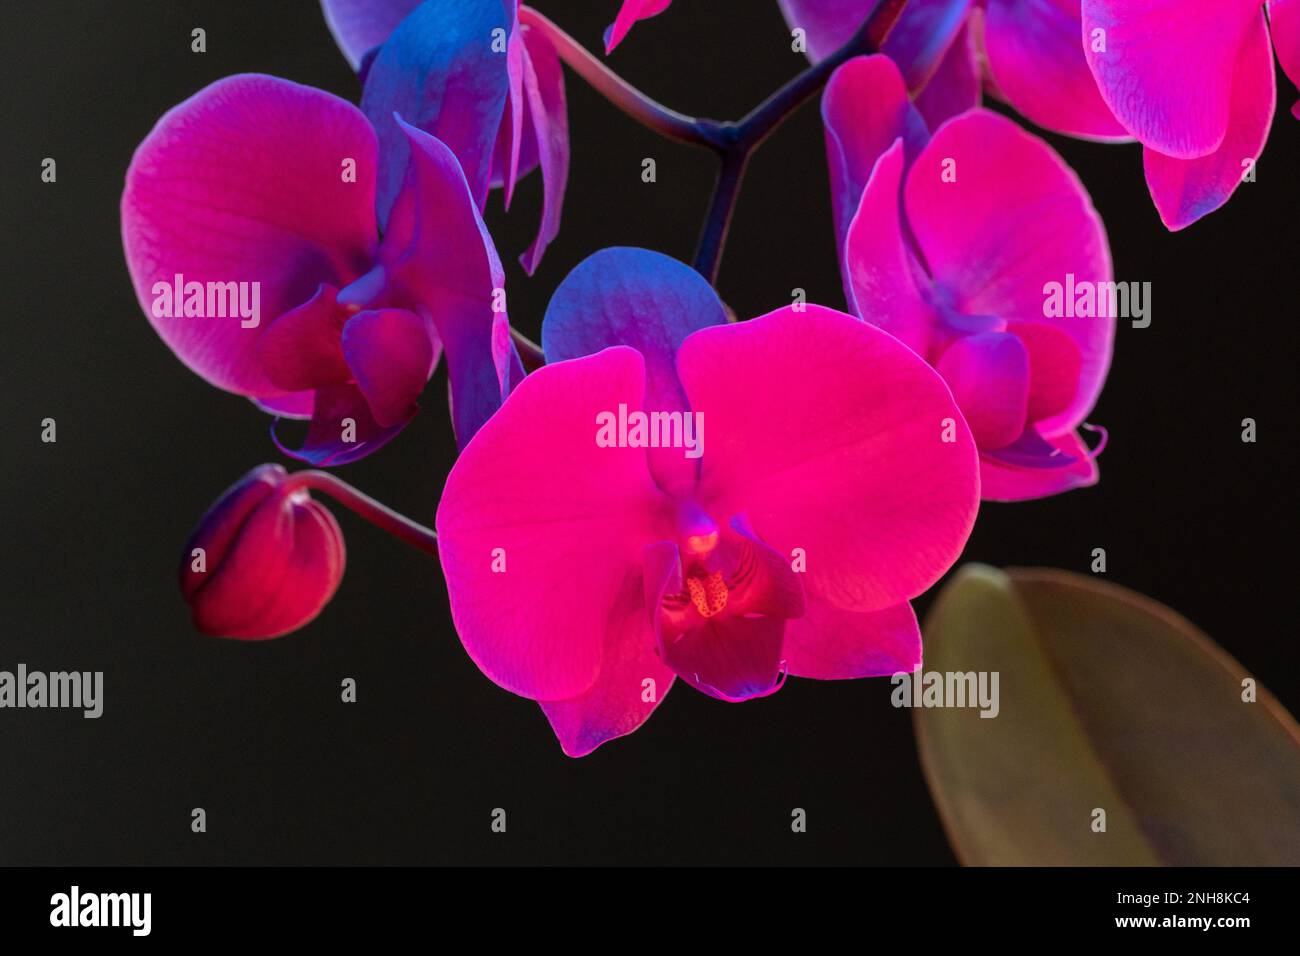 Branch of orchid flowers on dark background in neon light Stock